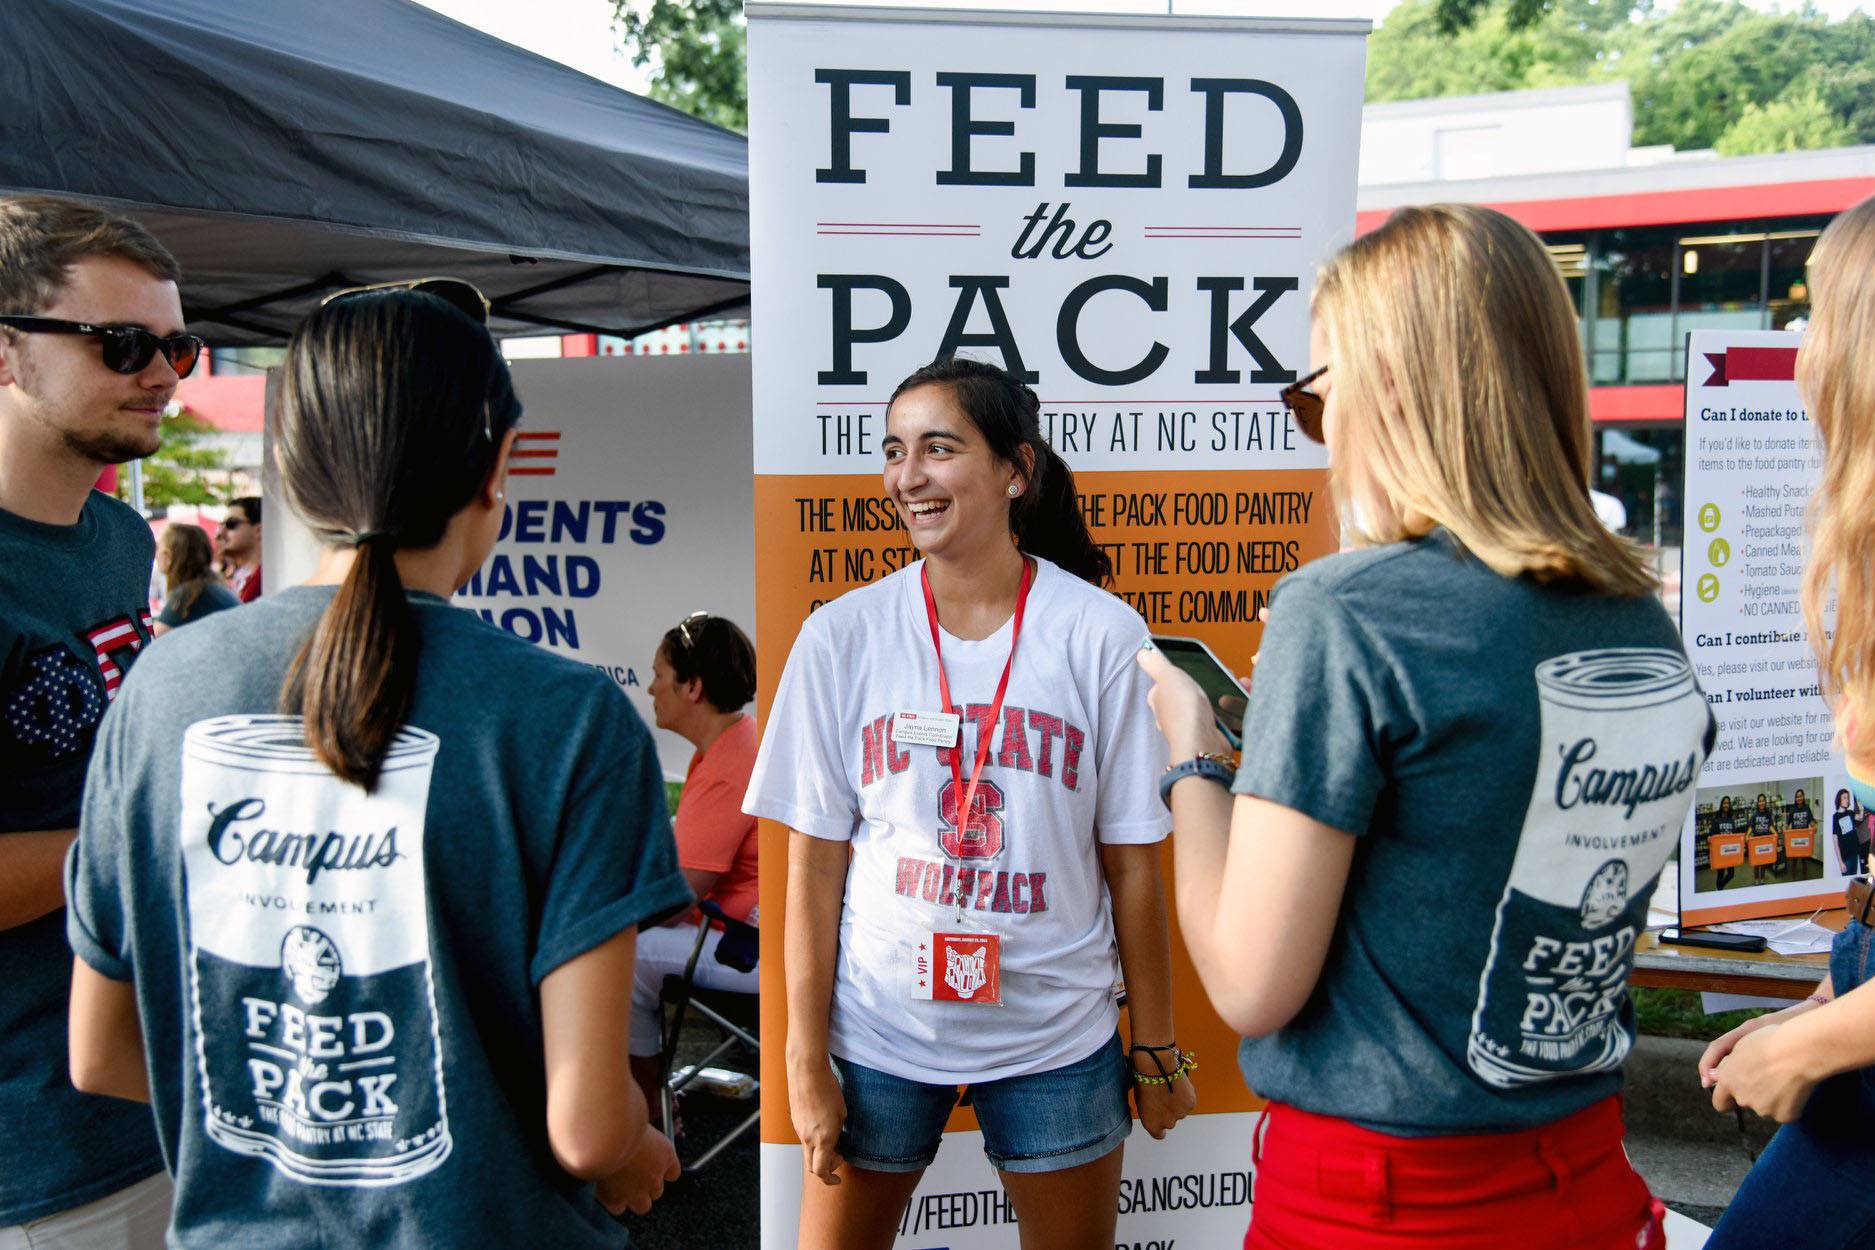 Jayna Lennon working an event for Feed the Pack